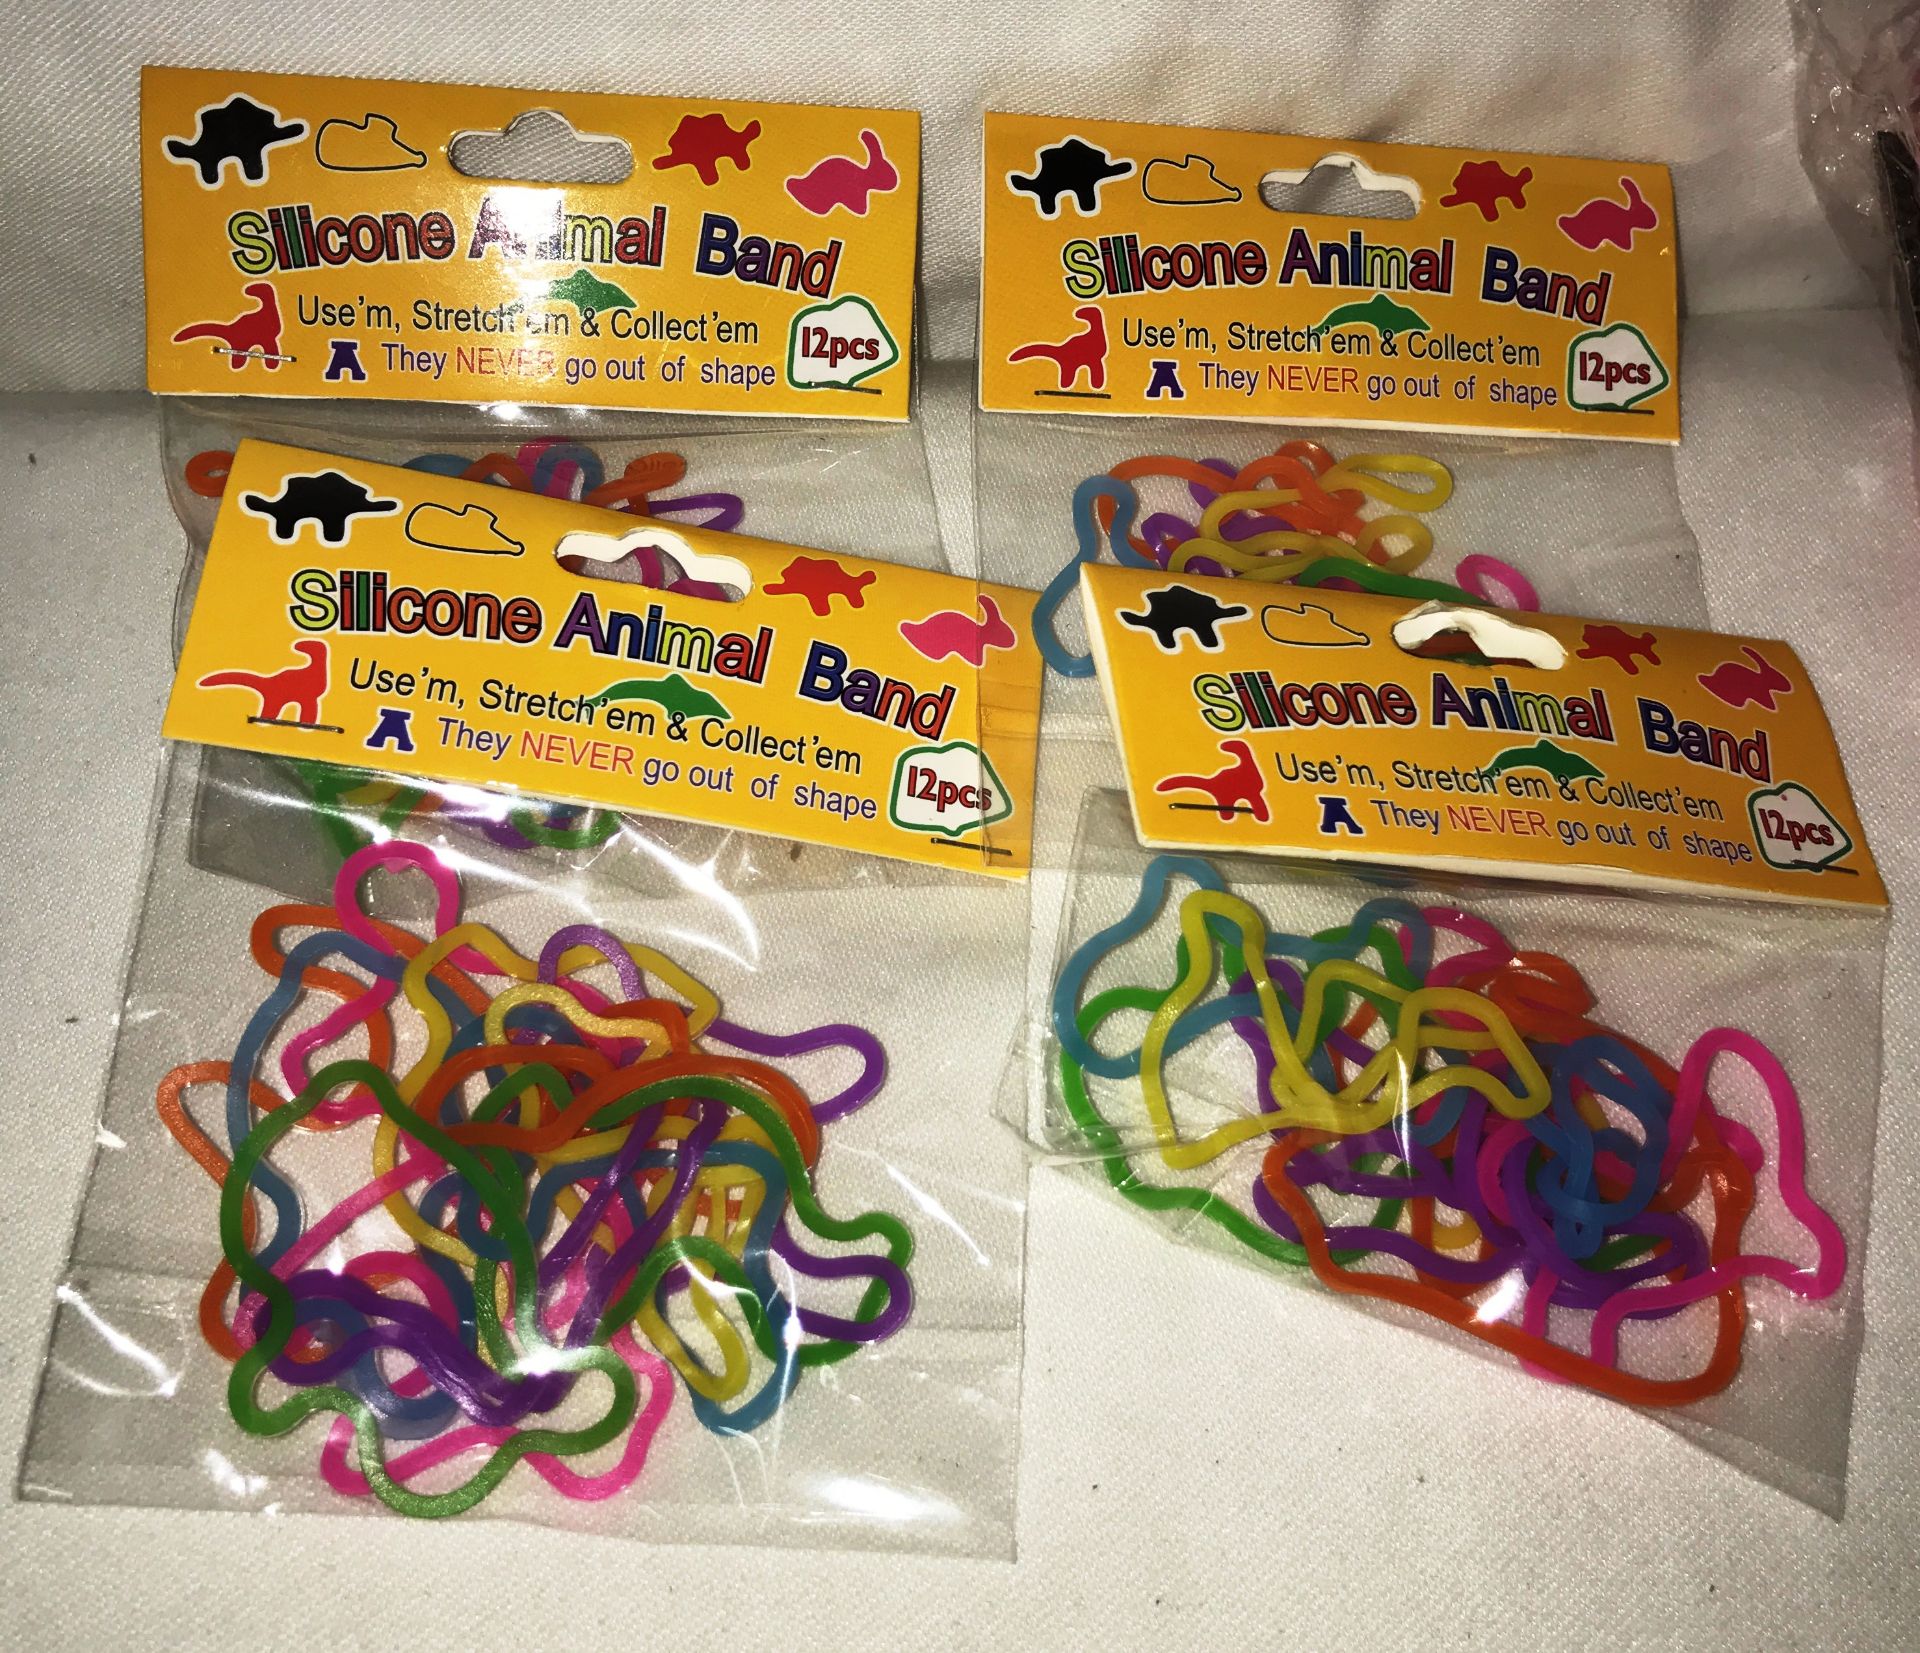 Approximately 500 x Silicone Animal Bands & Dotted Loom Bands - Image 2 of 3